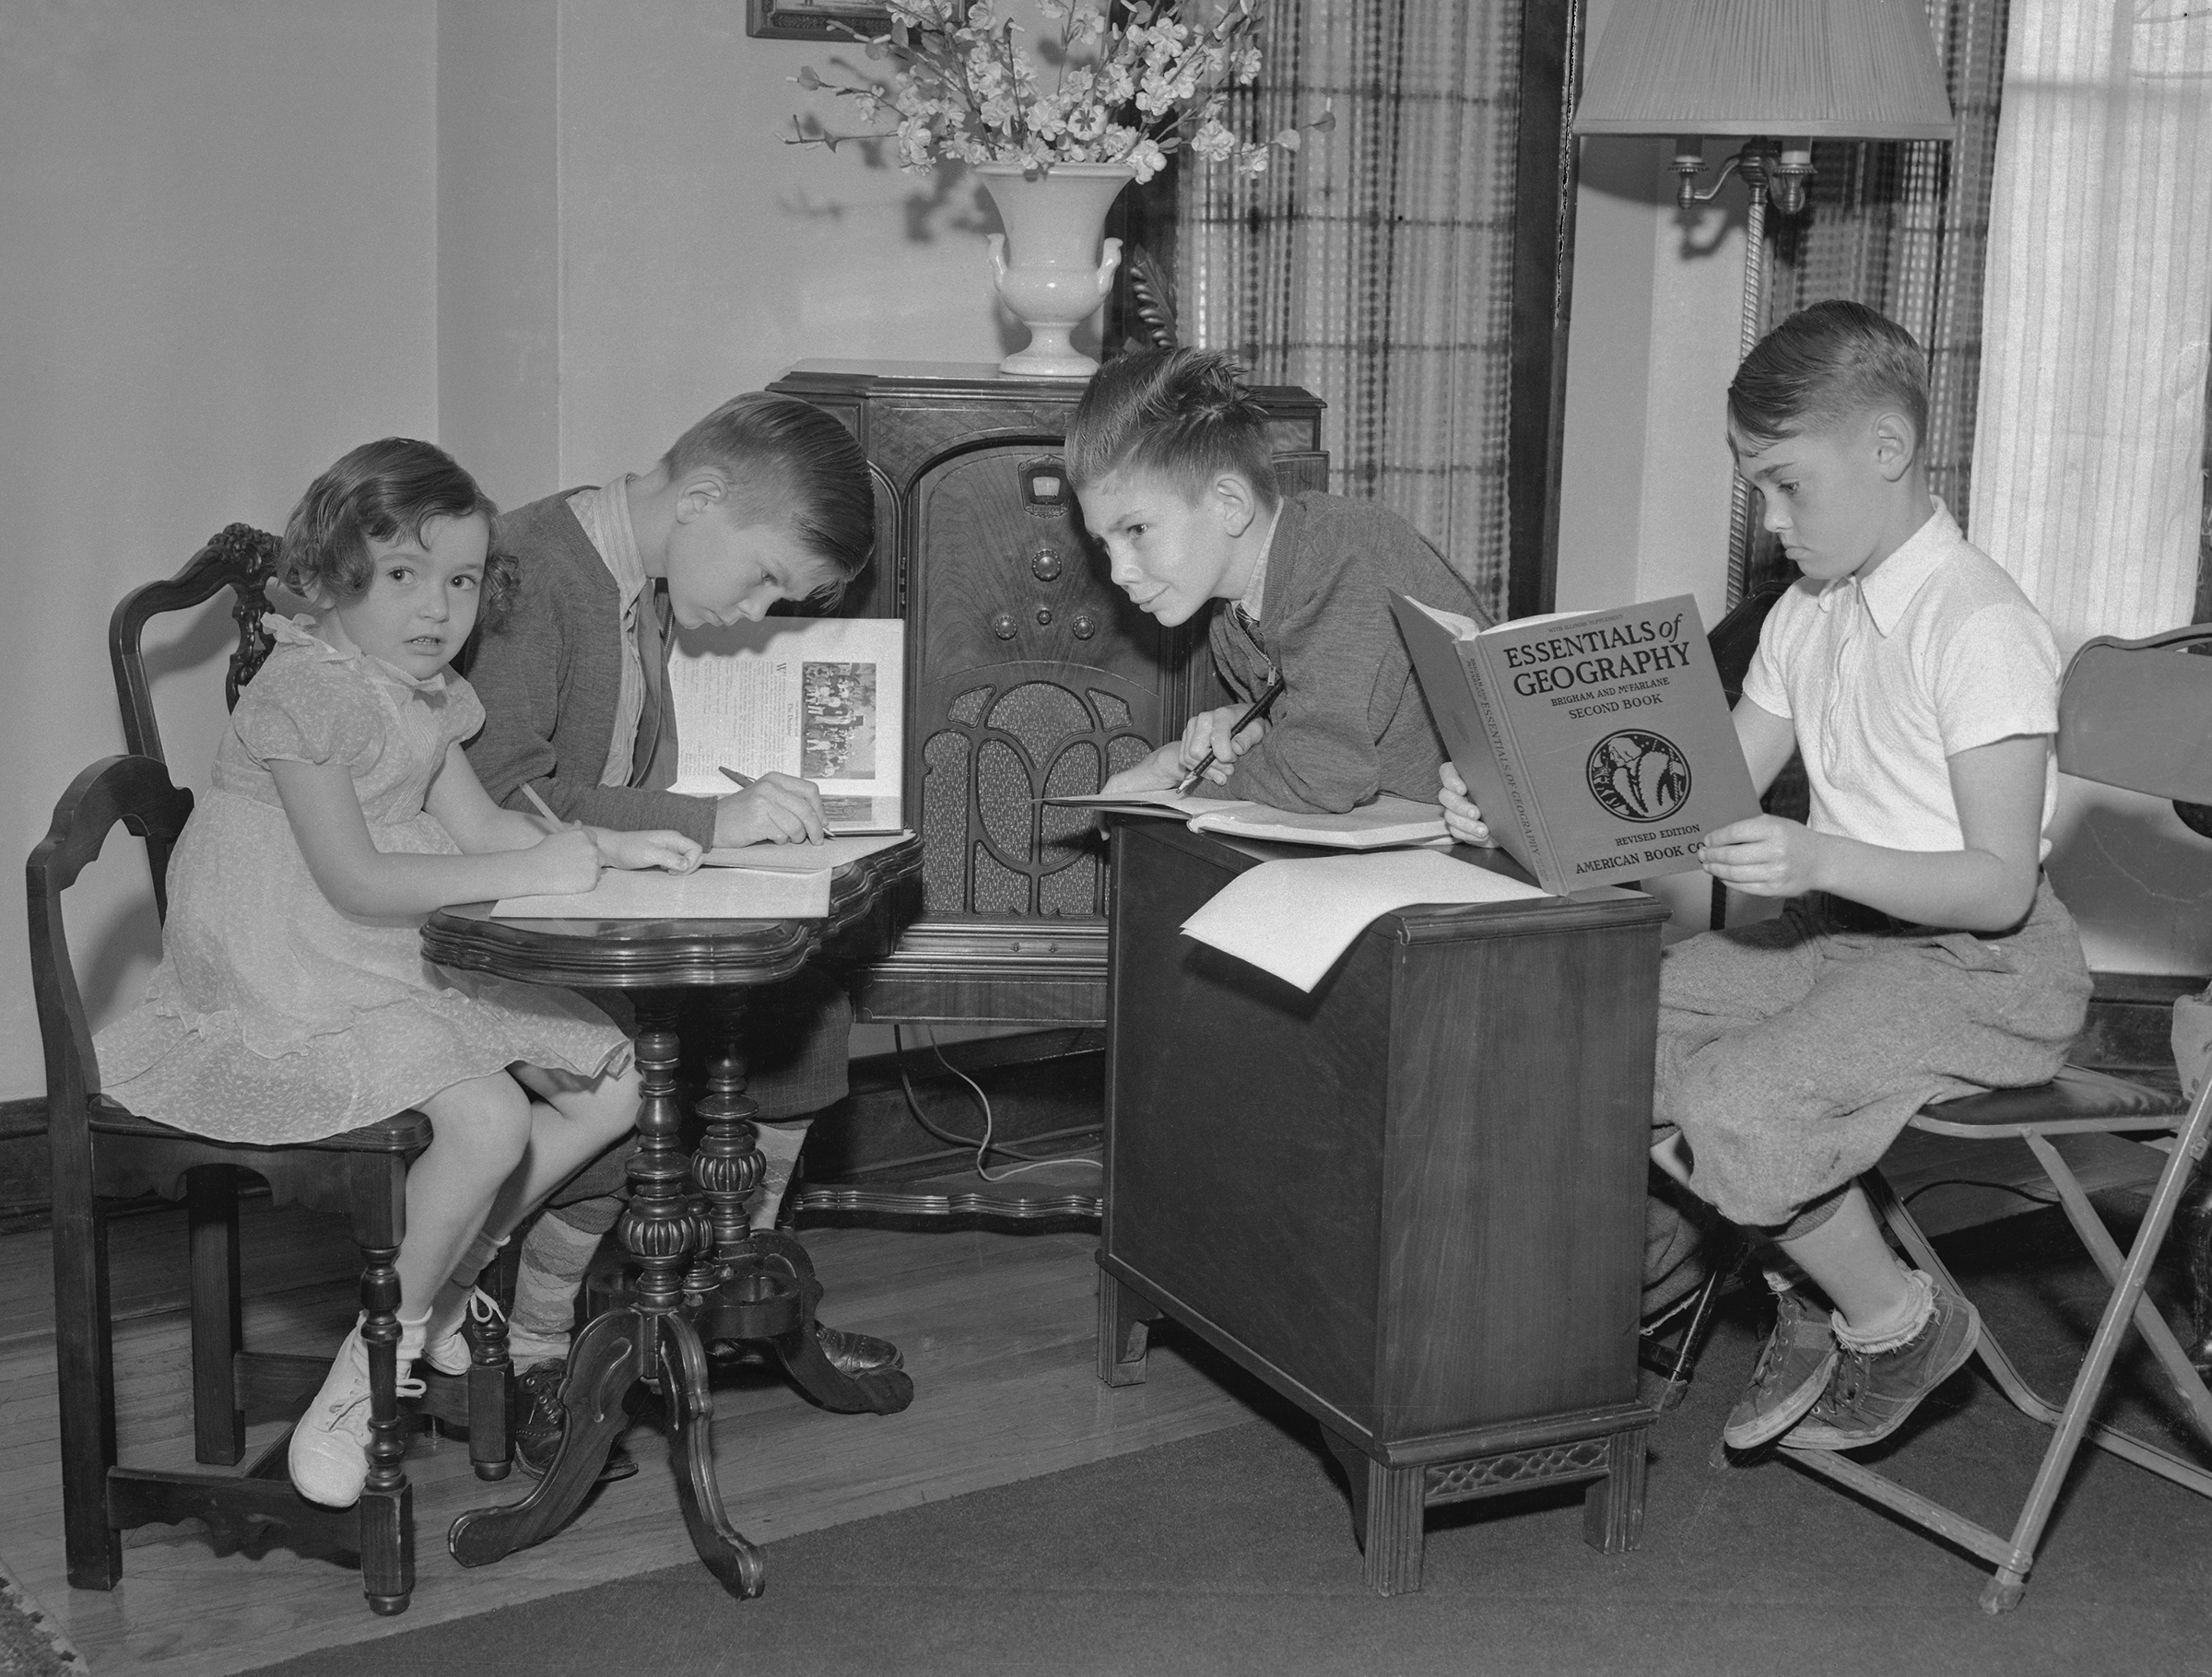 Due to the Infantile Paralysis Epidemic in Chicago, the reopening of schools was delayed. Students listen to a pre-arranged course of study via the radio stations, in accordance with a schedule drawn up by several school principals, on Sept 13, 1937 (Bettmann Archive/Getty Images)